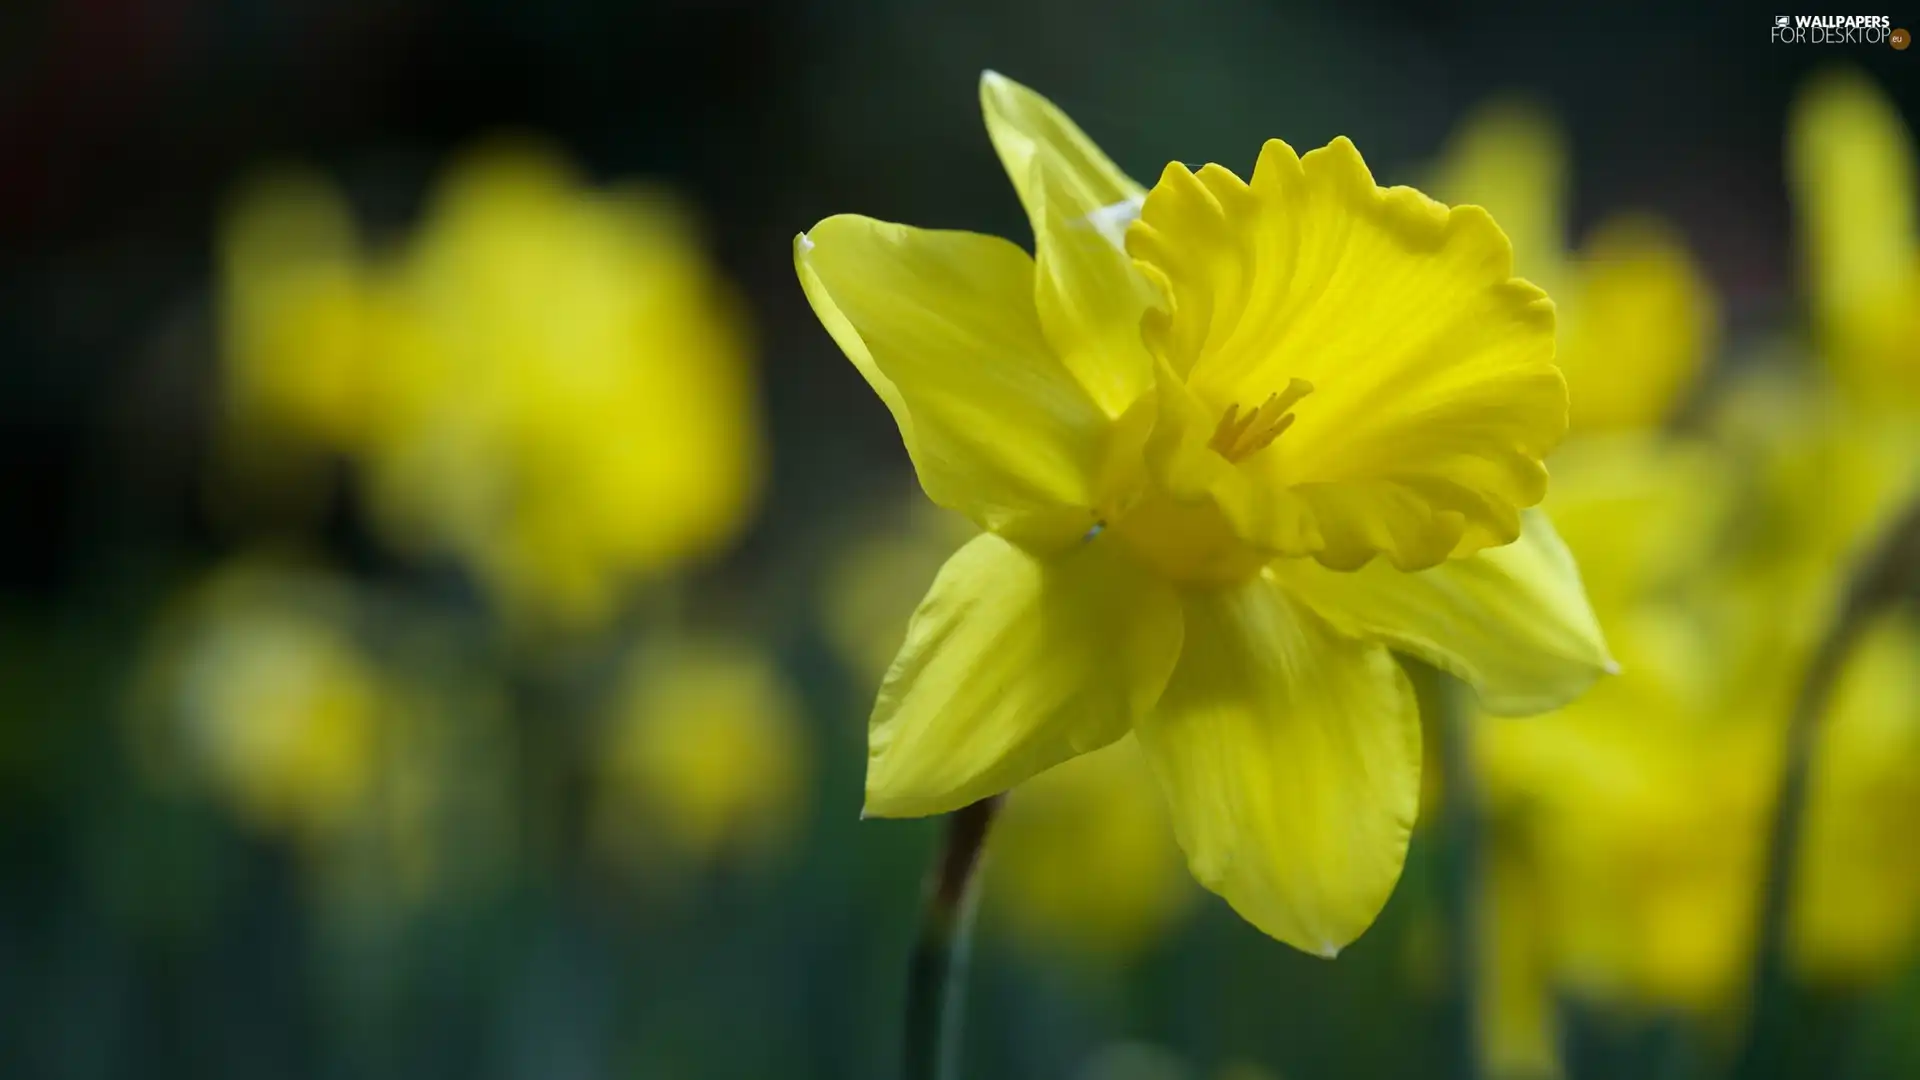 Yellow, jonquil, blurry background, Colourfull Flowers